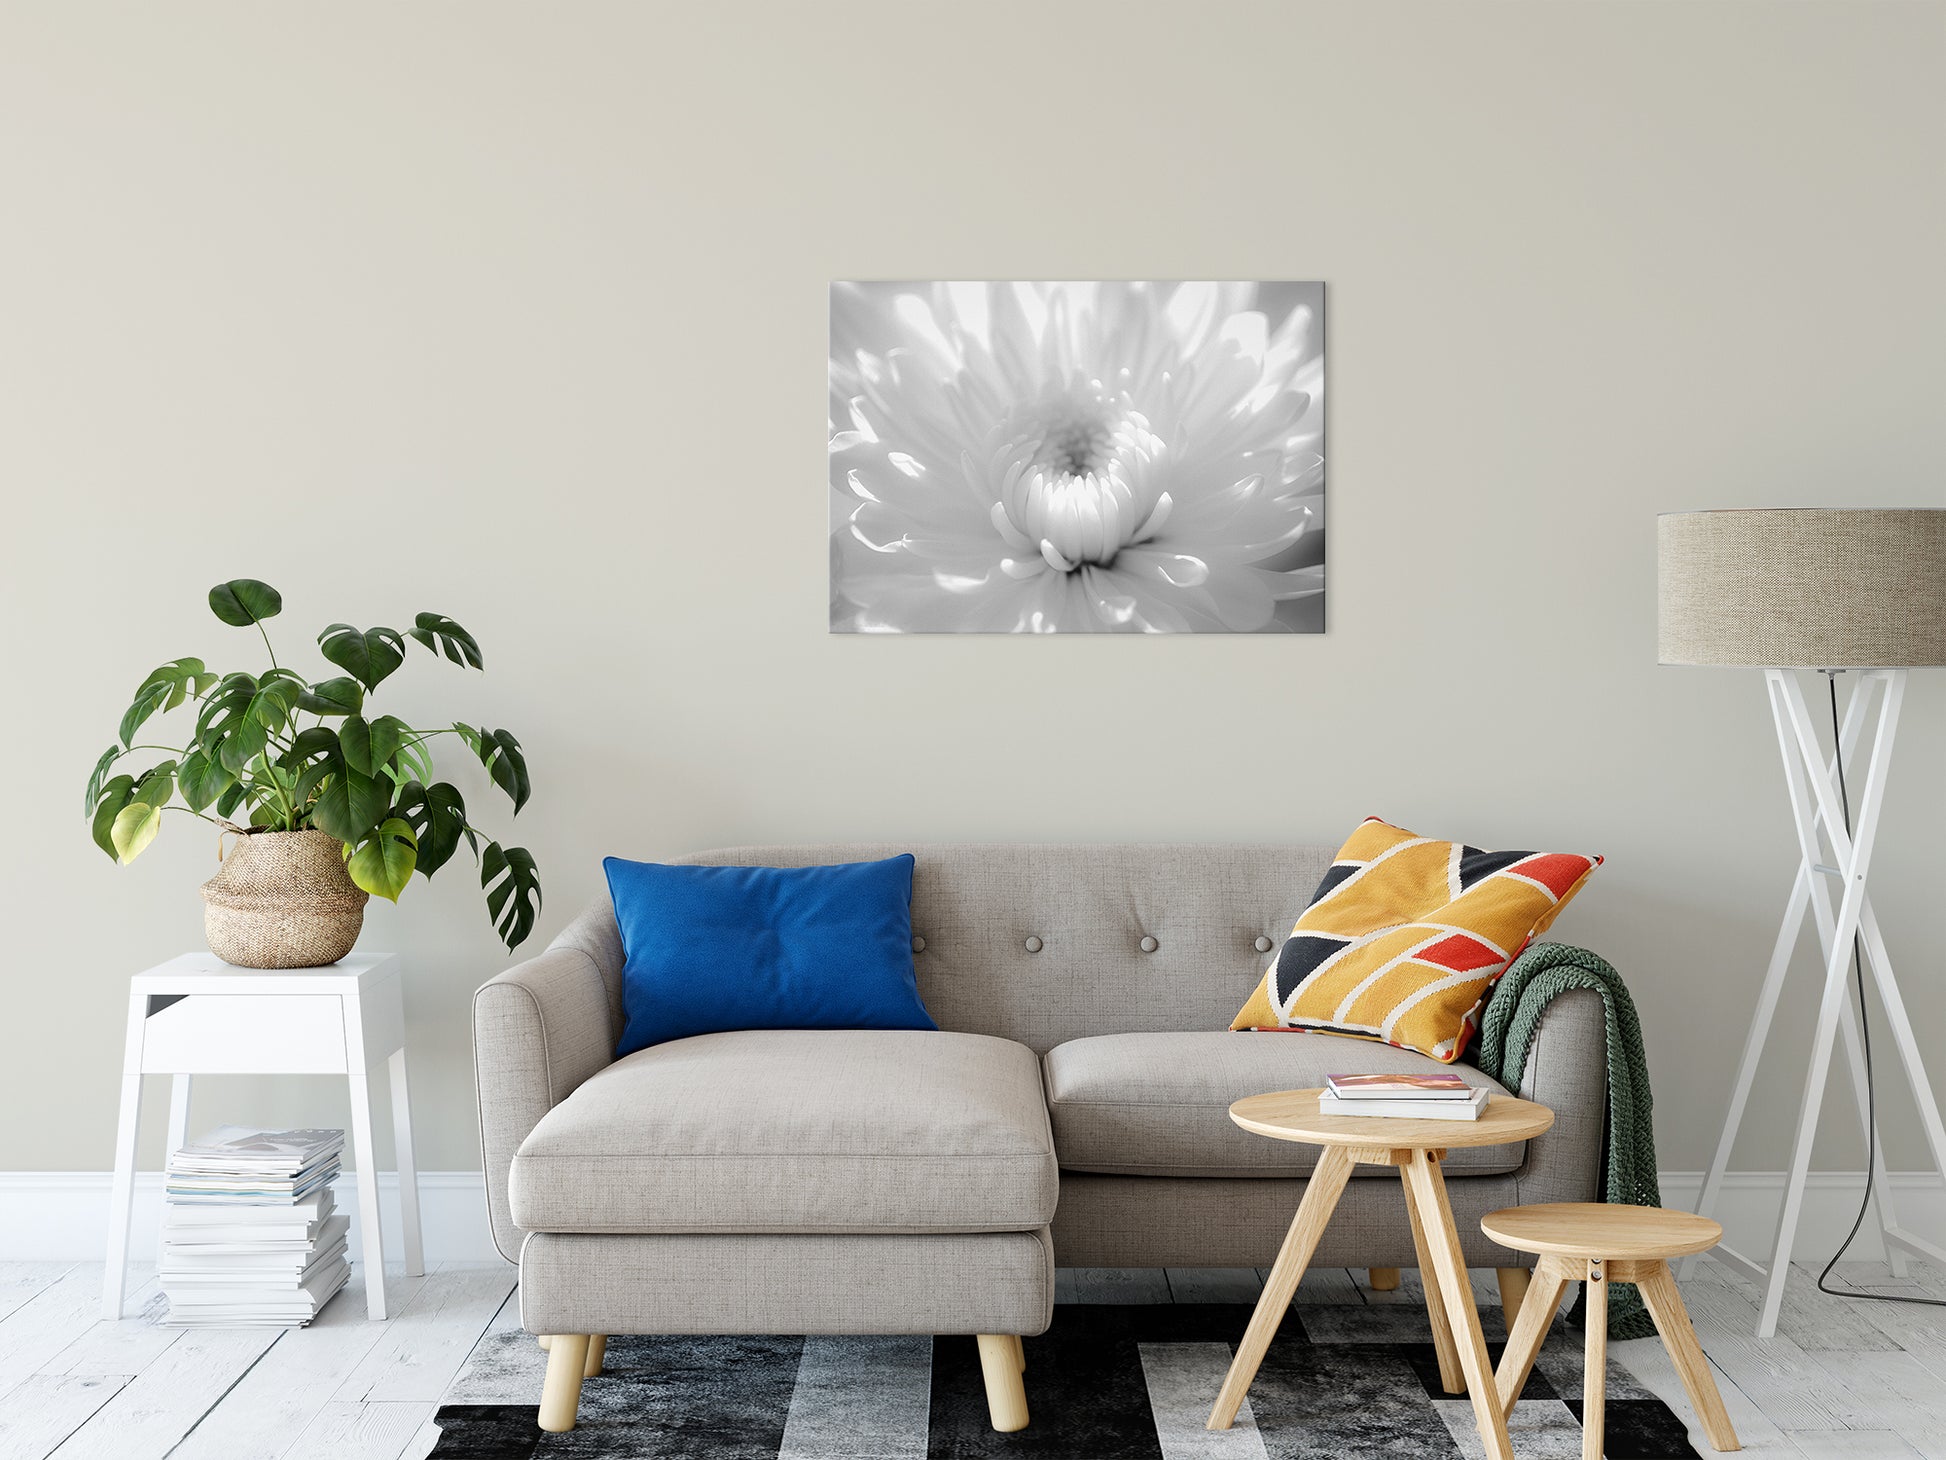 Infrared Flower 2 Nature / Floral Photo Fine Art Canvas Wall Art Prints 24" x 36" - PIPAFINEART